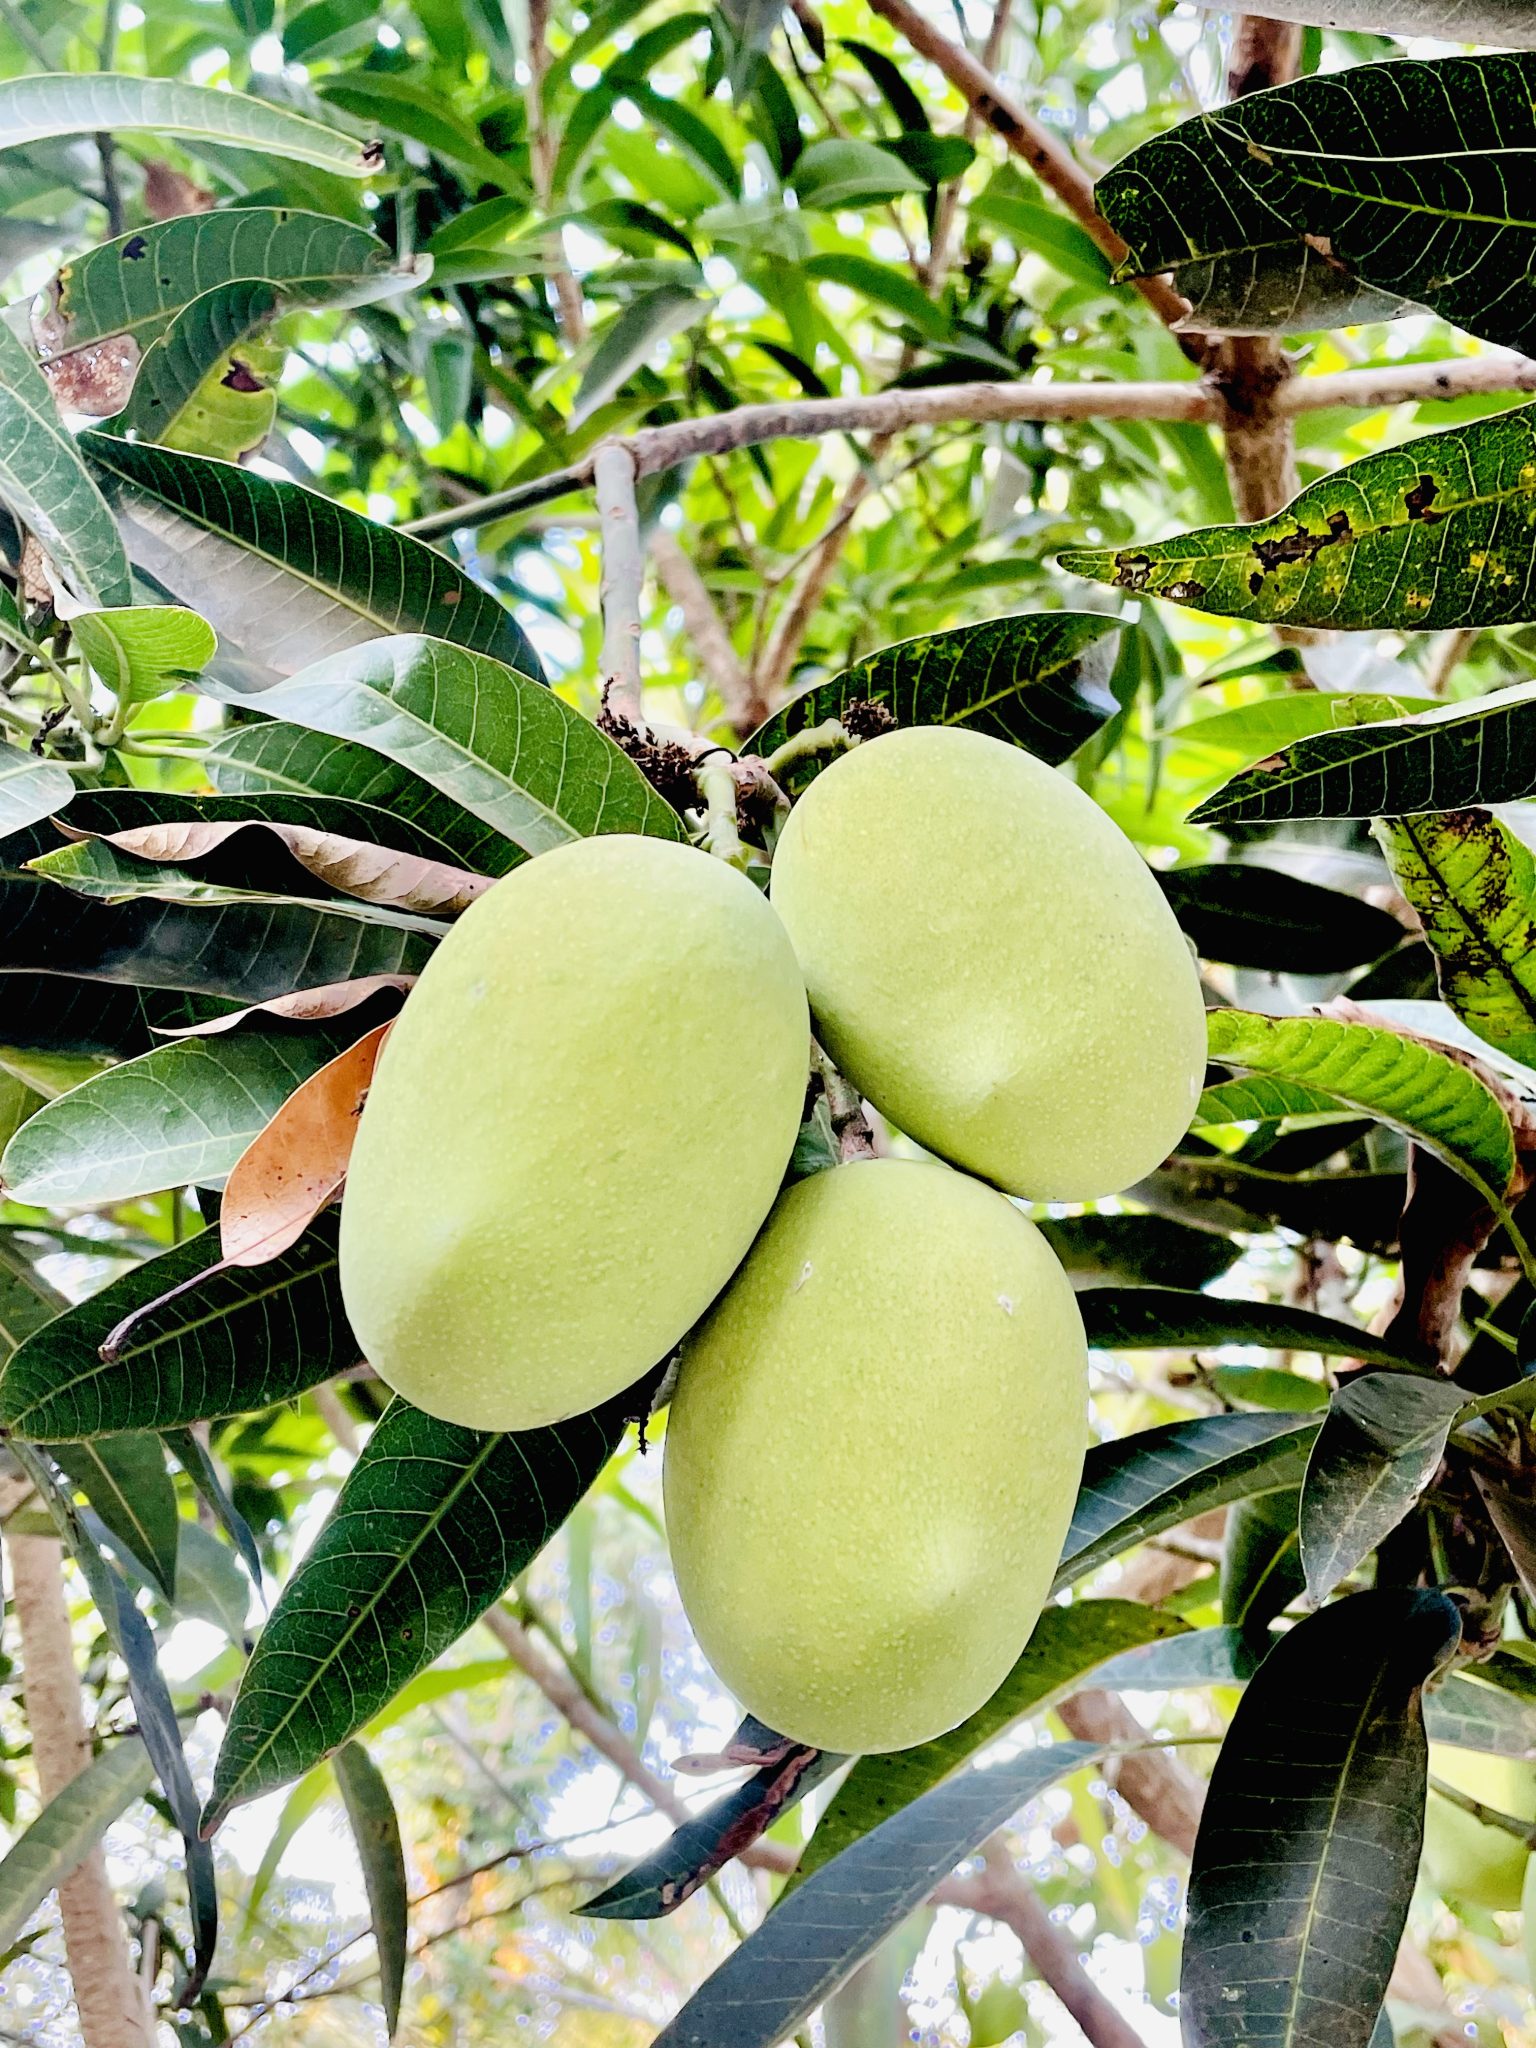 Tender Mangoes. From my uncle’s home. Kozhikode, Kerala.  Three large mangoes on a tree branch.